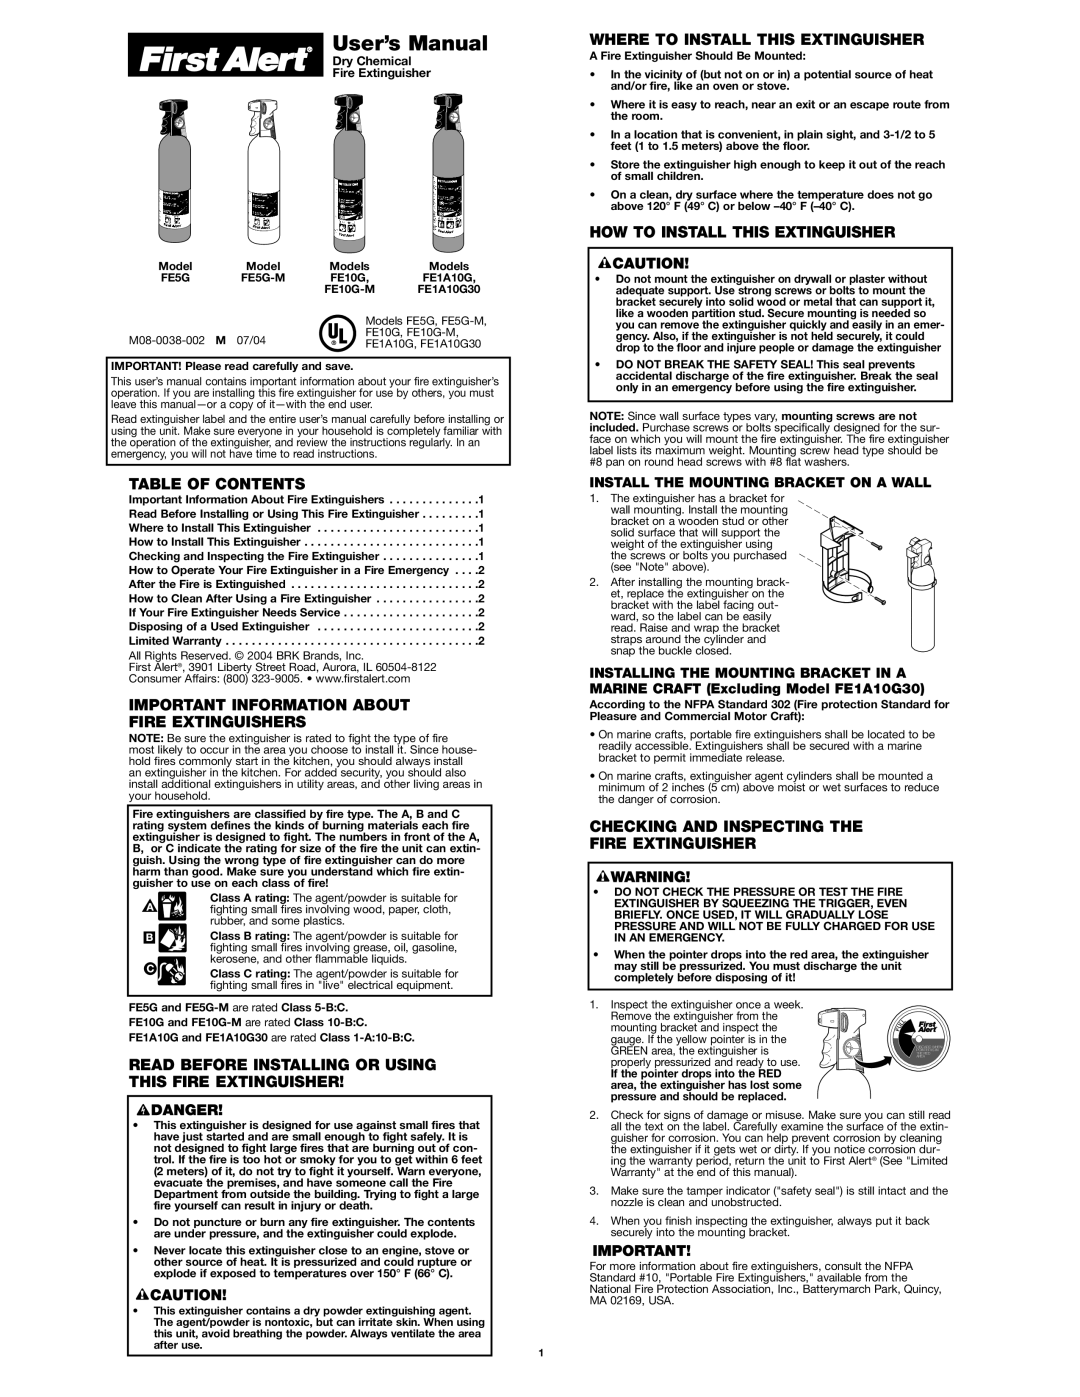 First Alert FE5G-M, FE10G user manual Table Of Contents, Important Information About Fire Extinguishers, User’s Manual 